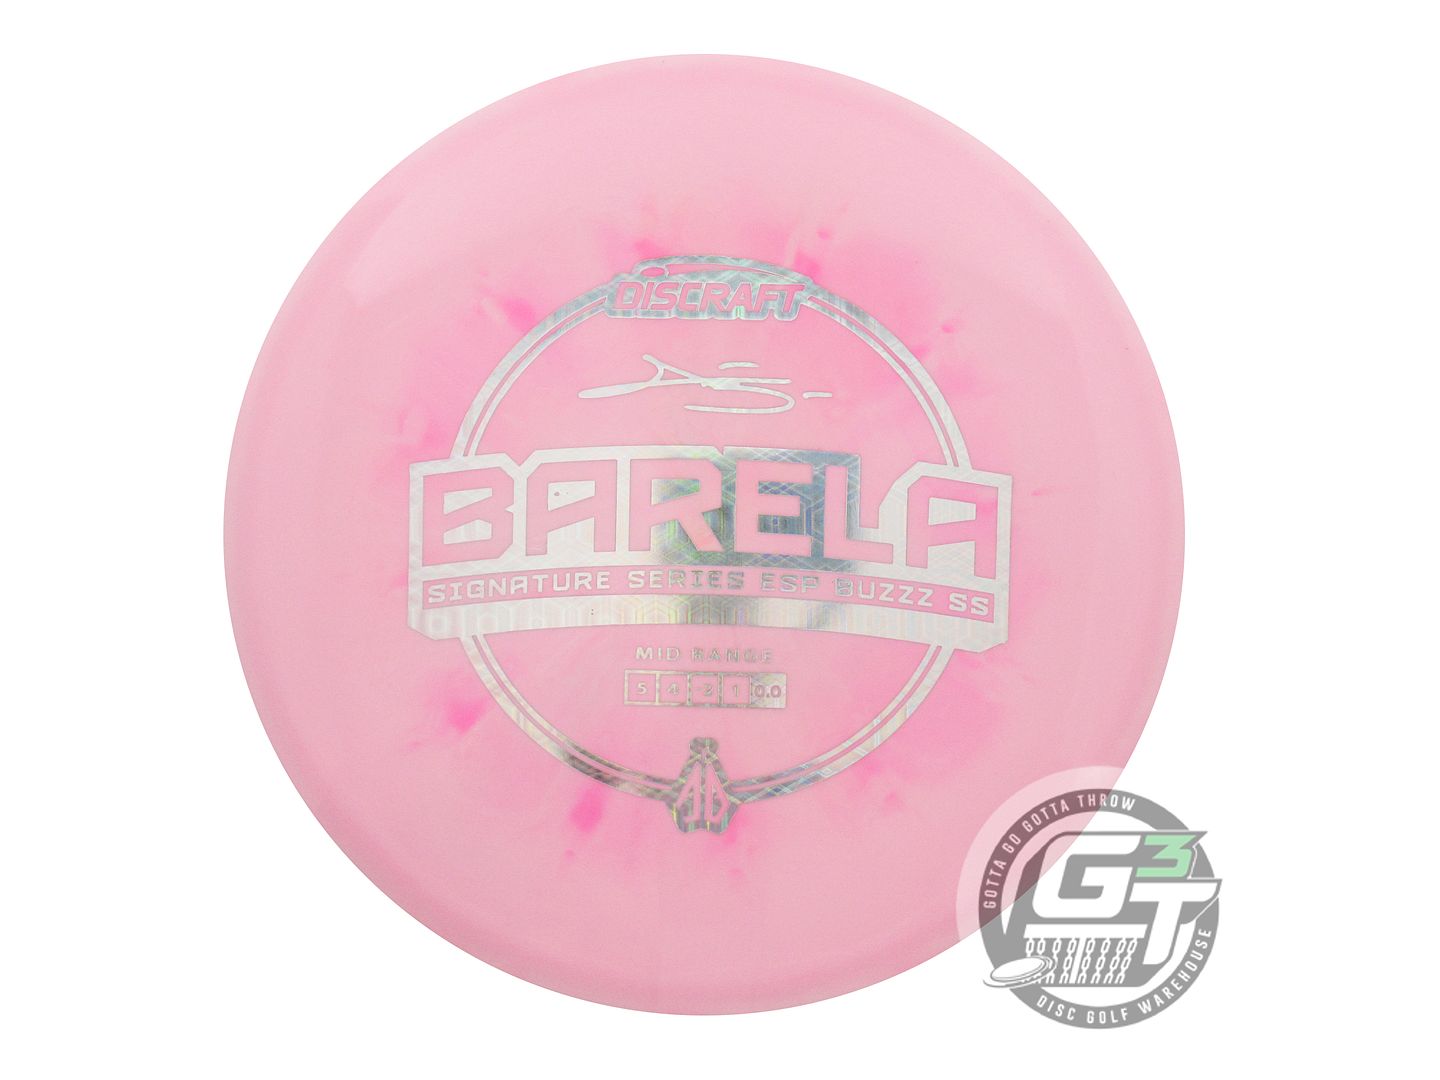 Discraft Limited Edition 2023 Signature Series Anthony Barela Swirl ESP Buzzz SS Midrange Golf Disc (Individually Listed)